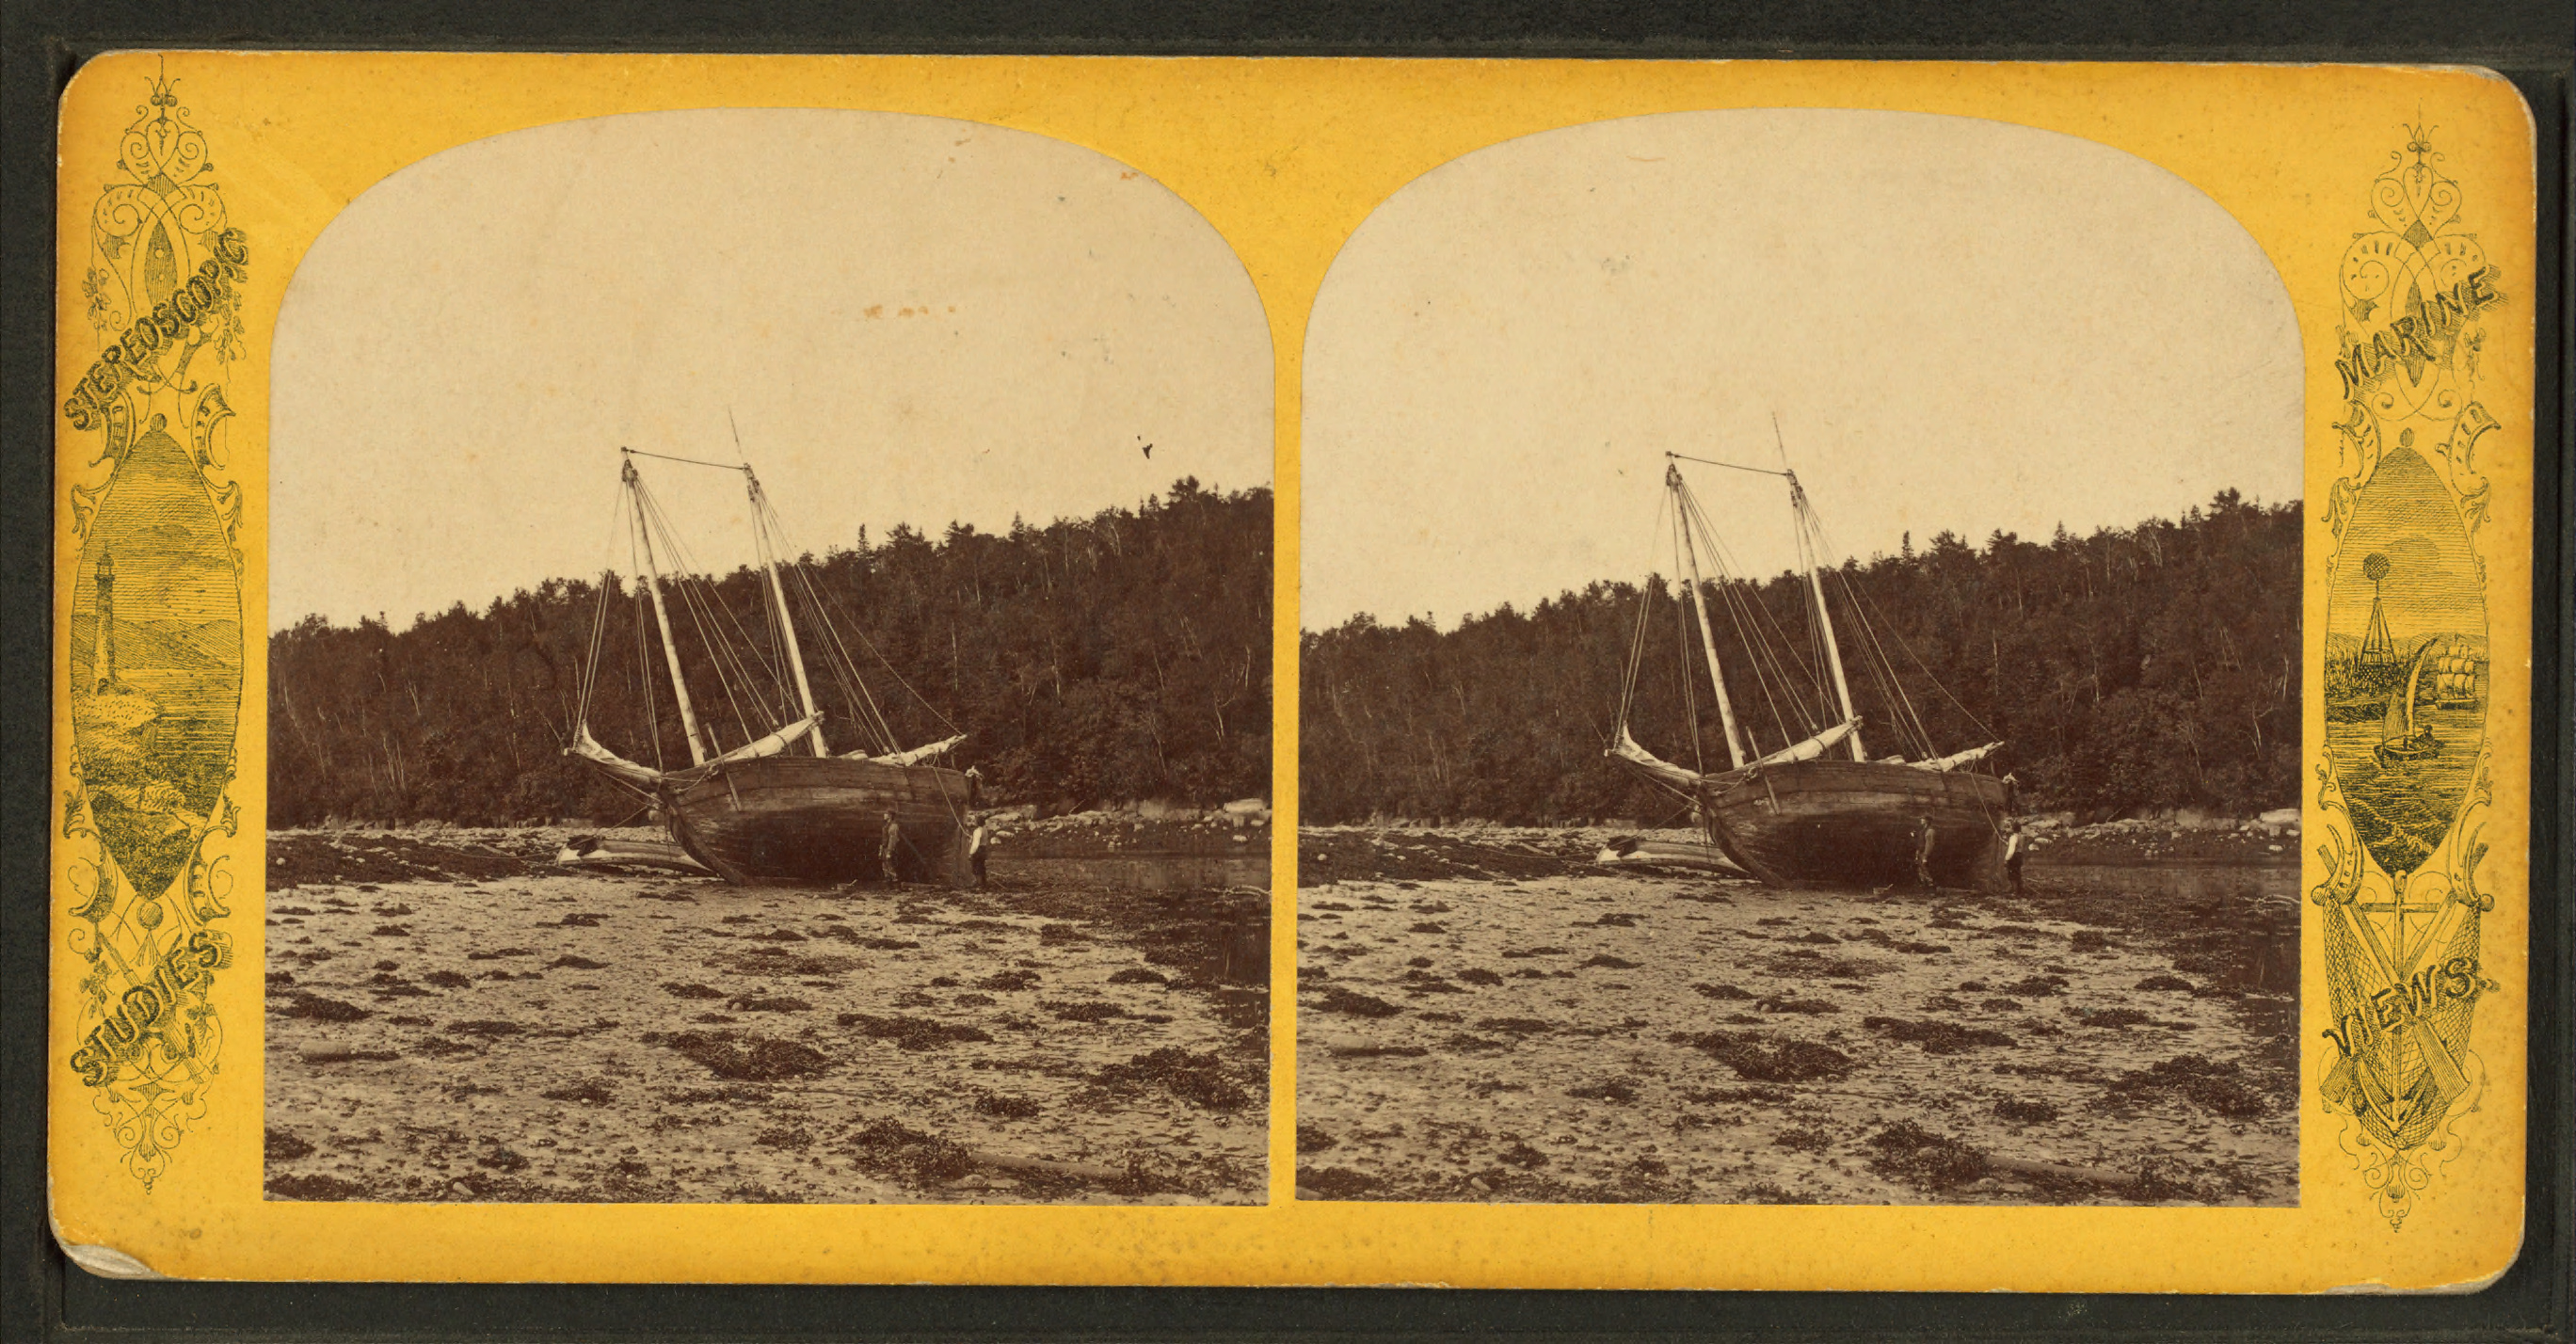 Schooner on the Bar, from Robert N. Dennis collection of stereoscopic views